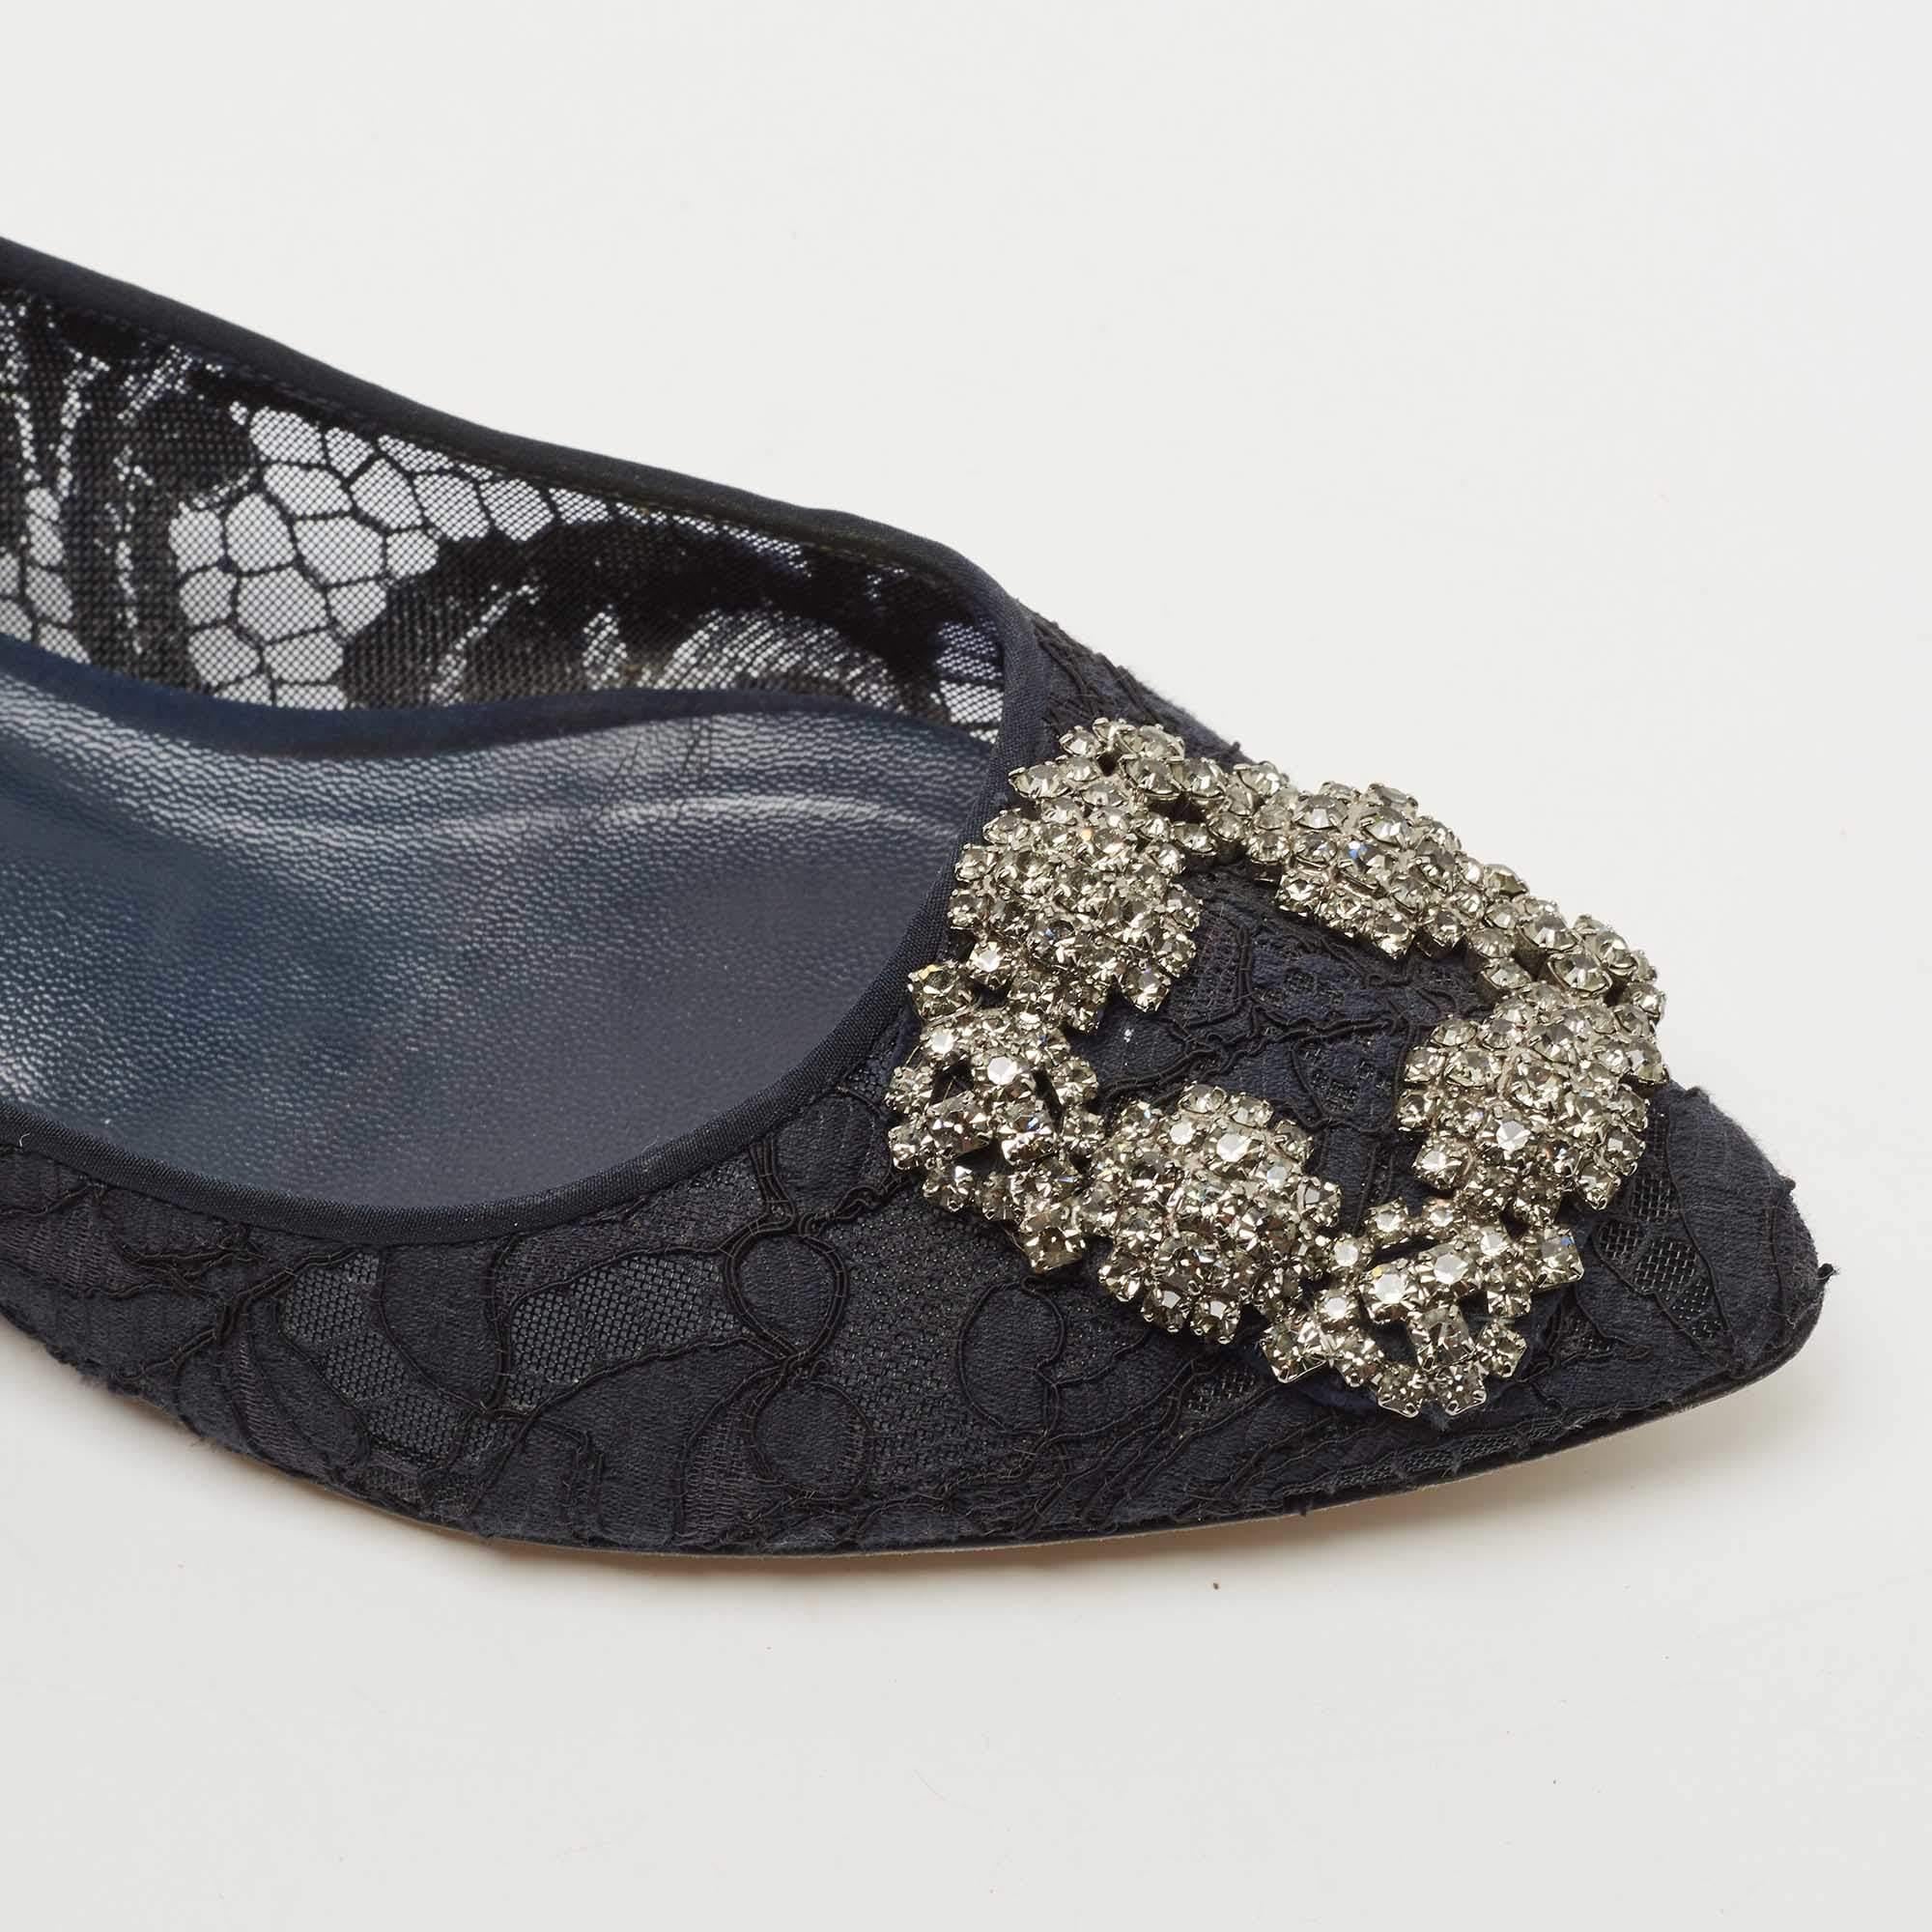 Manolo Blahnik Navy Blue Lace and Satin Hangisi Ballet Flats Size 37.5 3